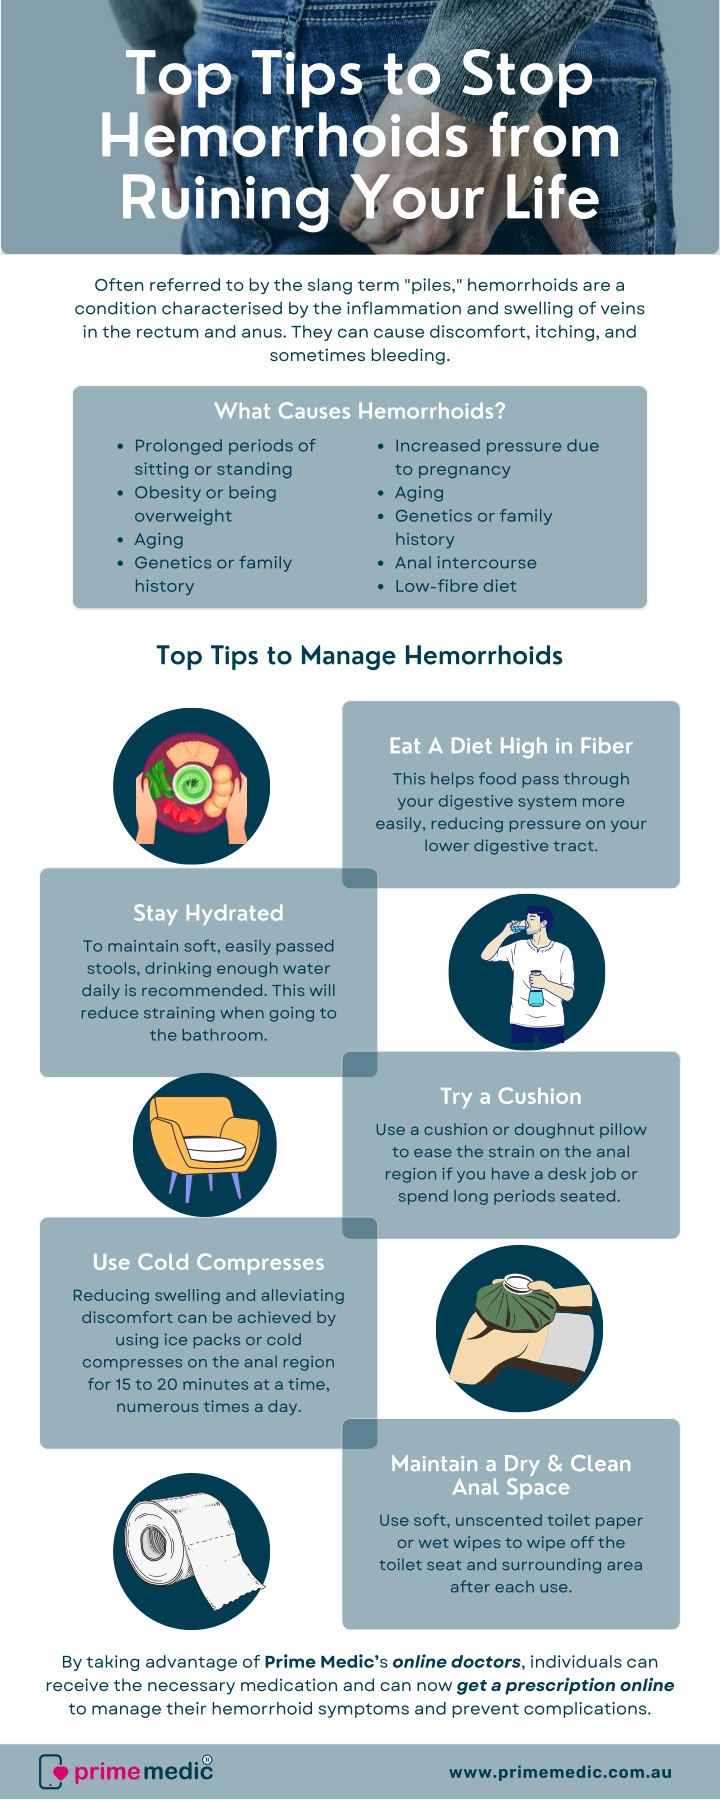 top tips to stop hemorrhoids from ruining your